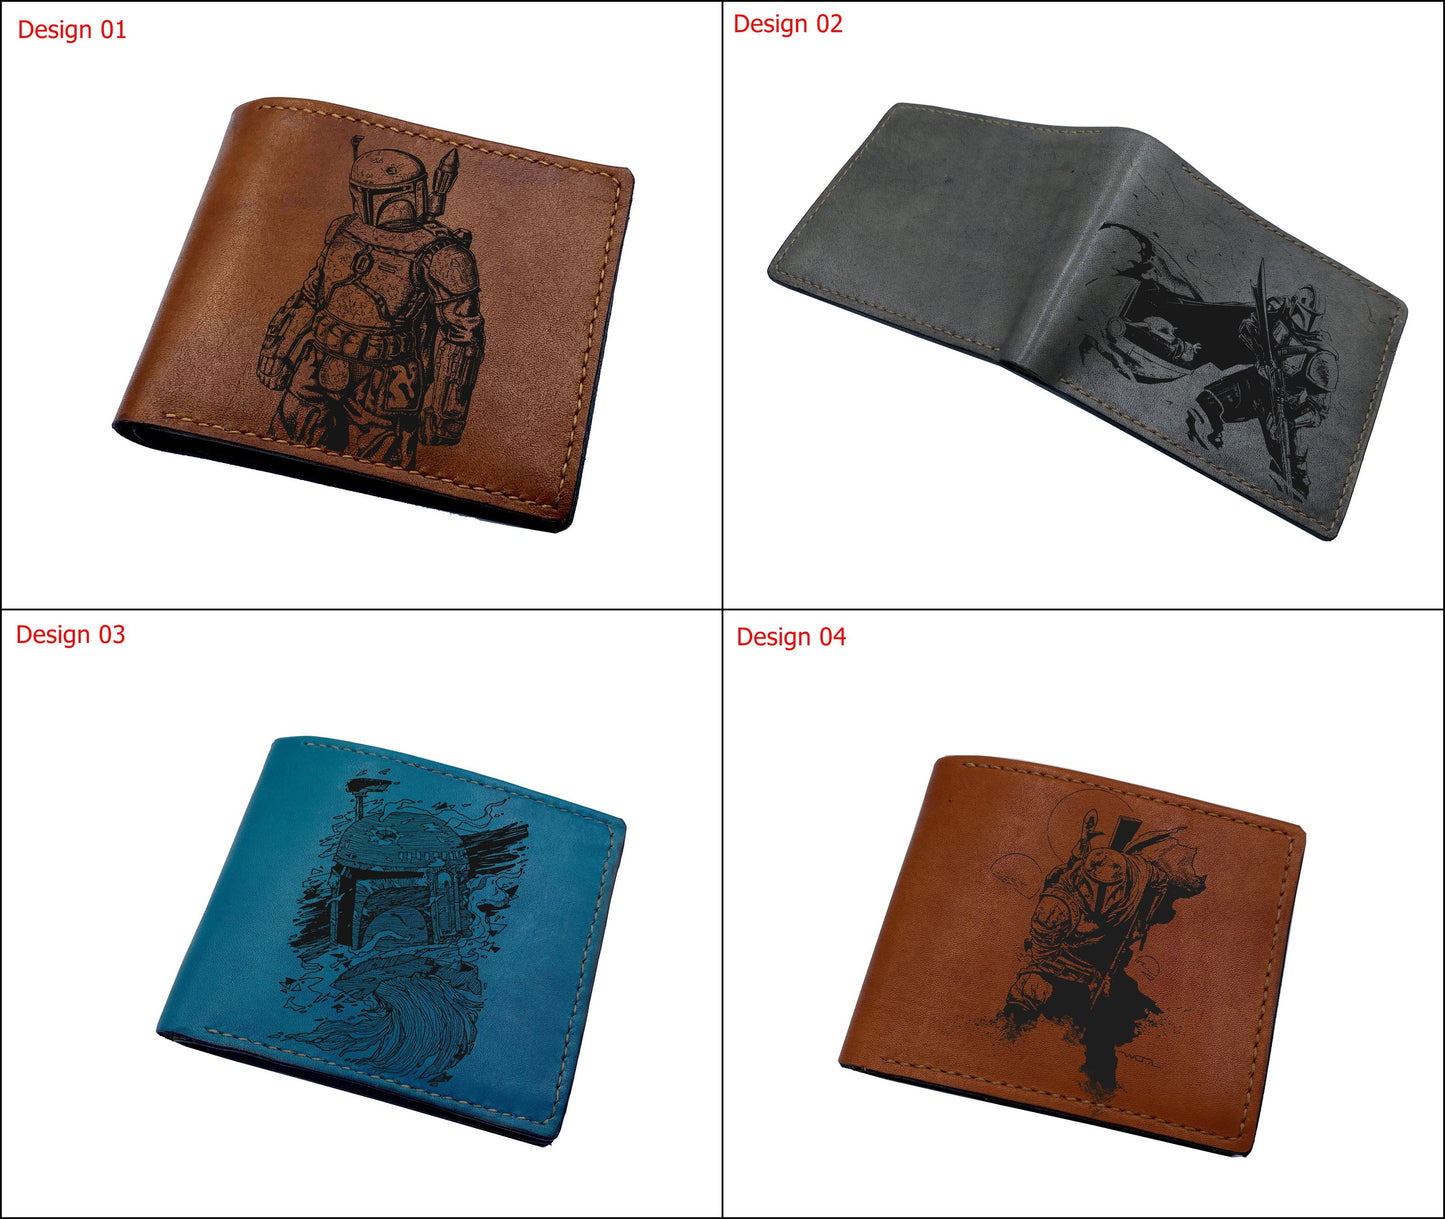 Starwars leather wallet for dad, The Mandalorian drawing art wallet, bifold leather wallet, christmas gift ideas for him